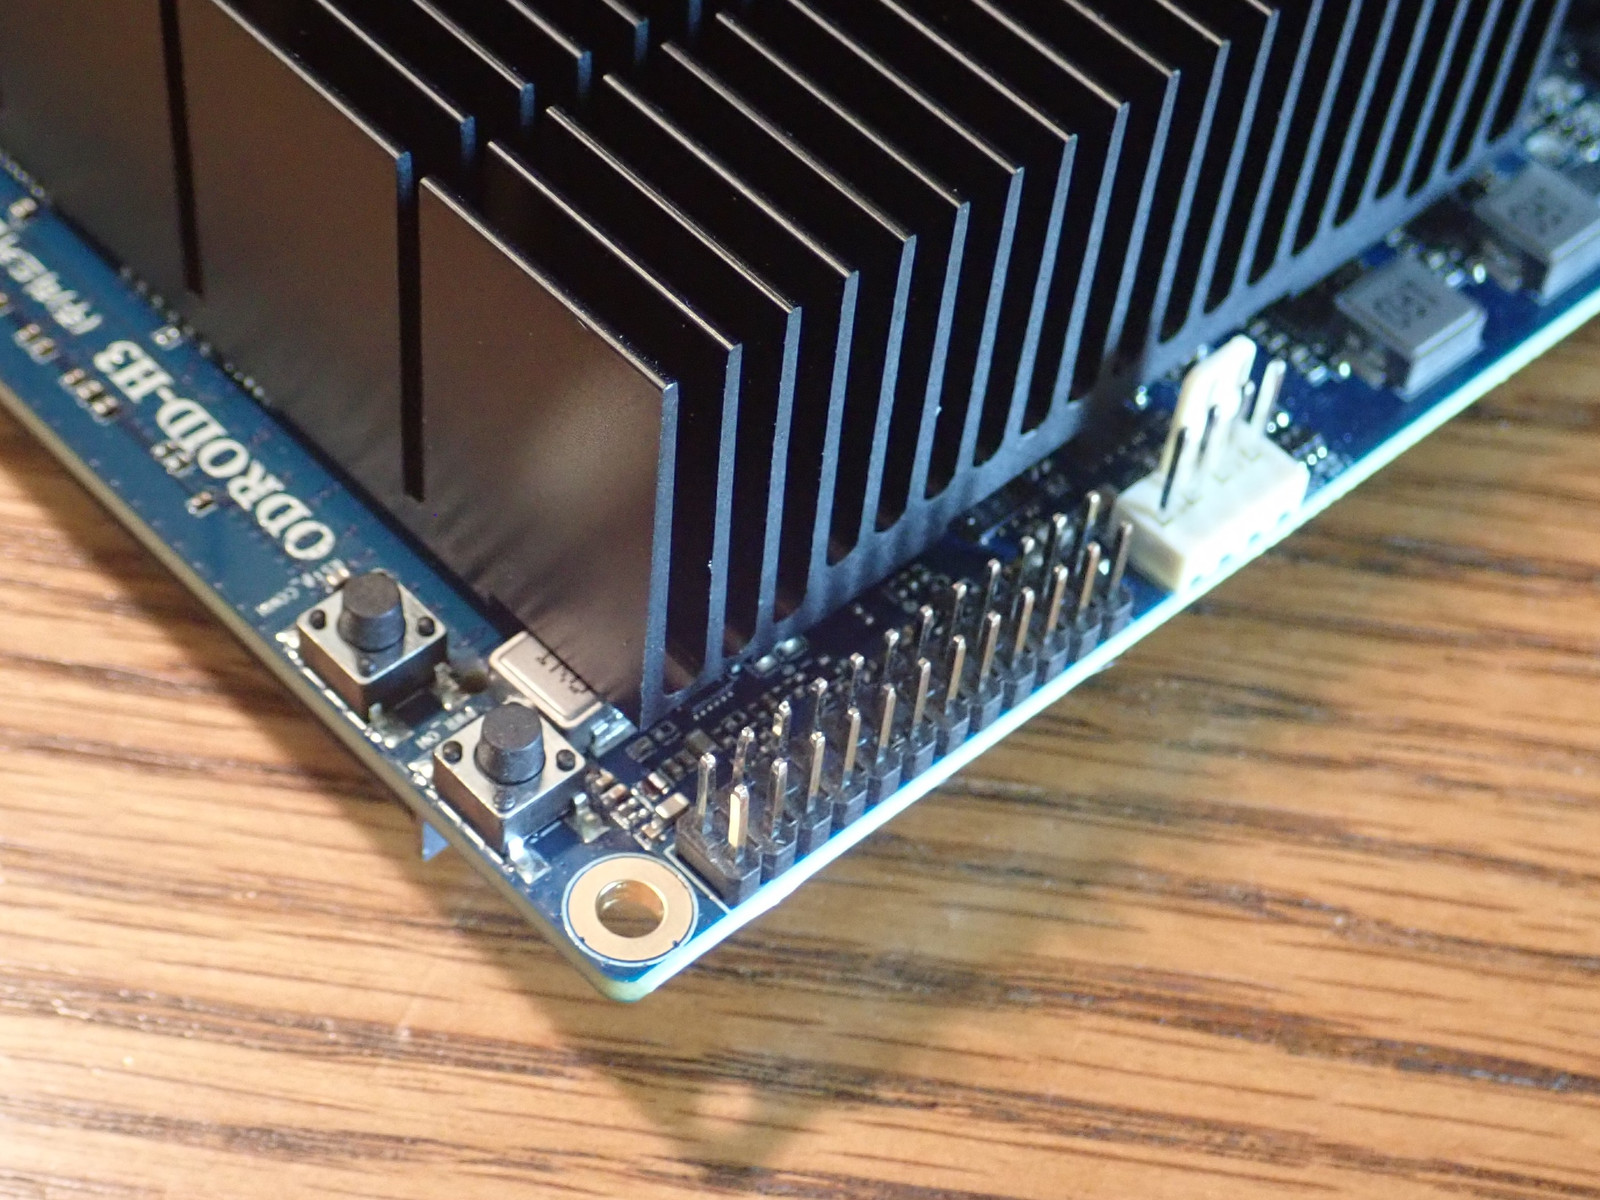 Odroid H3+ First Look, An All New Tiny & Fast X86 SBC! EMU, Gaming, 4K  Testing 